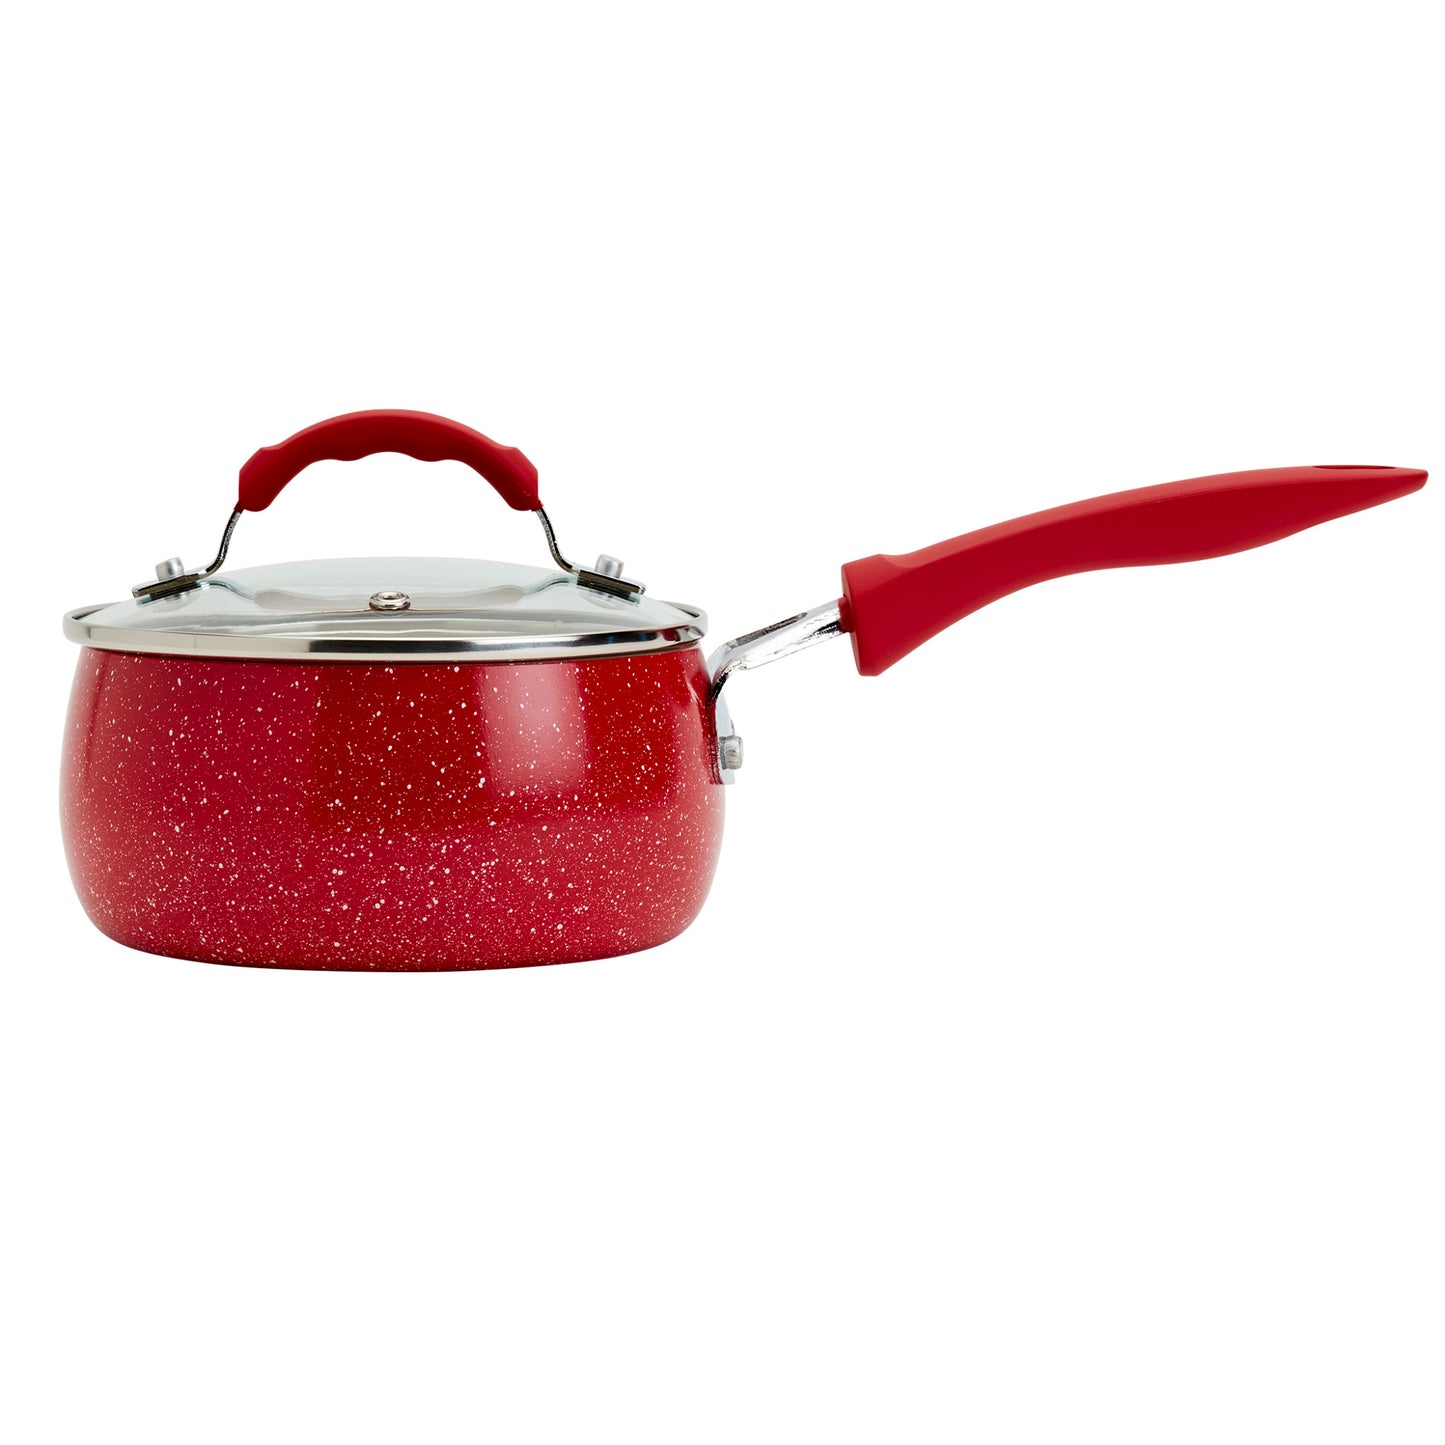 Dolly 1.5Qt Covered Sauce Pan - Speckled Red